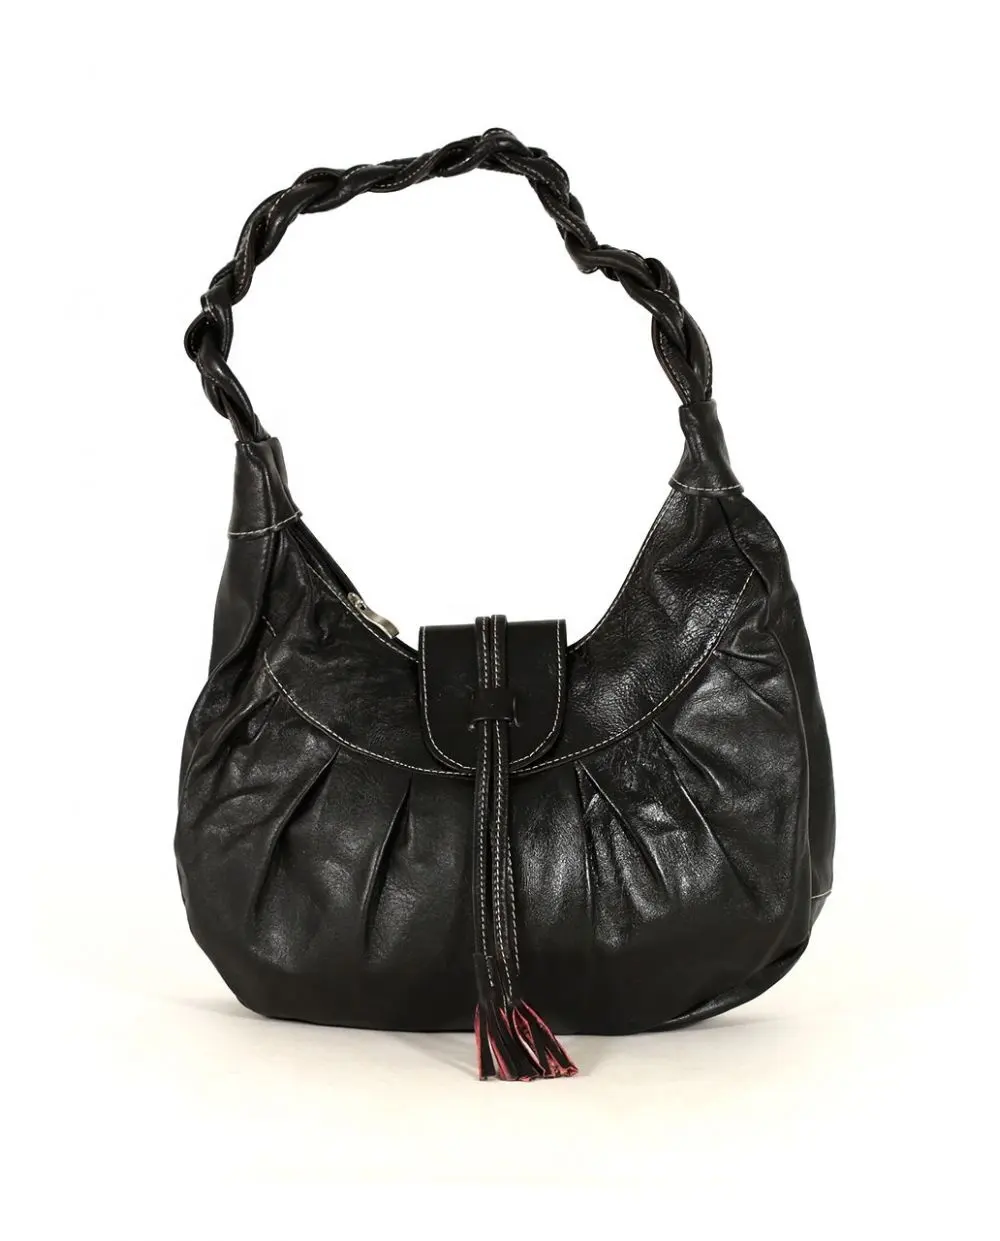 Moroccan New Arrival Women black Handbags Stylish Shoulder bag calf Soft leather bags Handmade Handmade by our craftsman